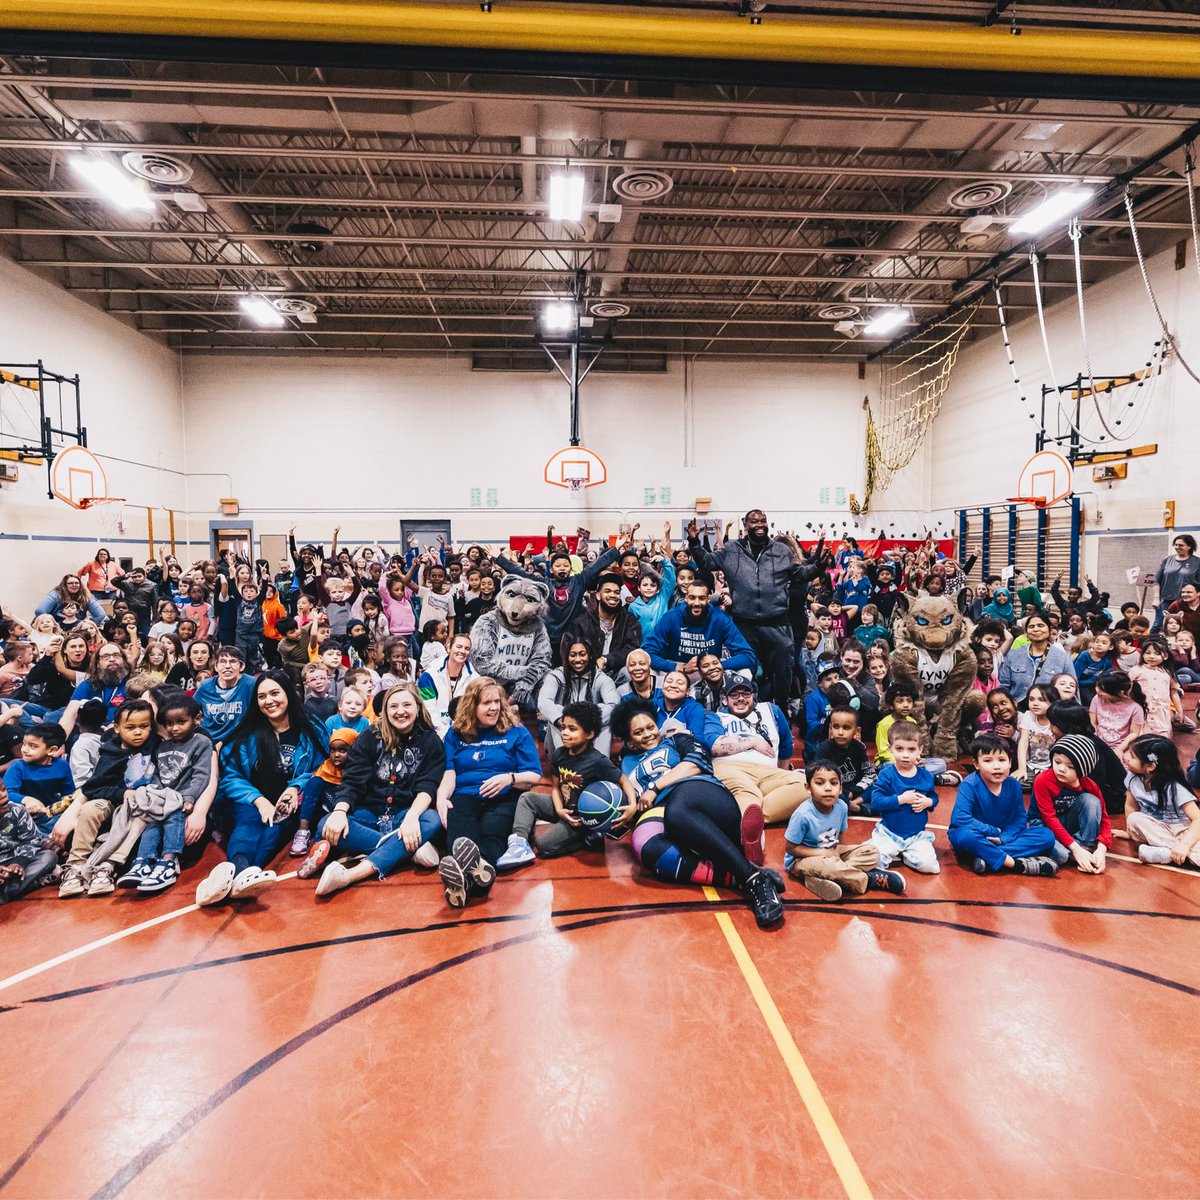 Earlier this week, the @Timberwolves & @Lynx in partnership with @Deluxe & @StrivePub provided all students at Pillsbury Elementary School with free books to support and amplify diversity in reading! @KarlTowns @rudygobert27 along with Diamond Miler made the day extra special!